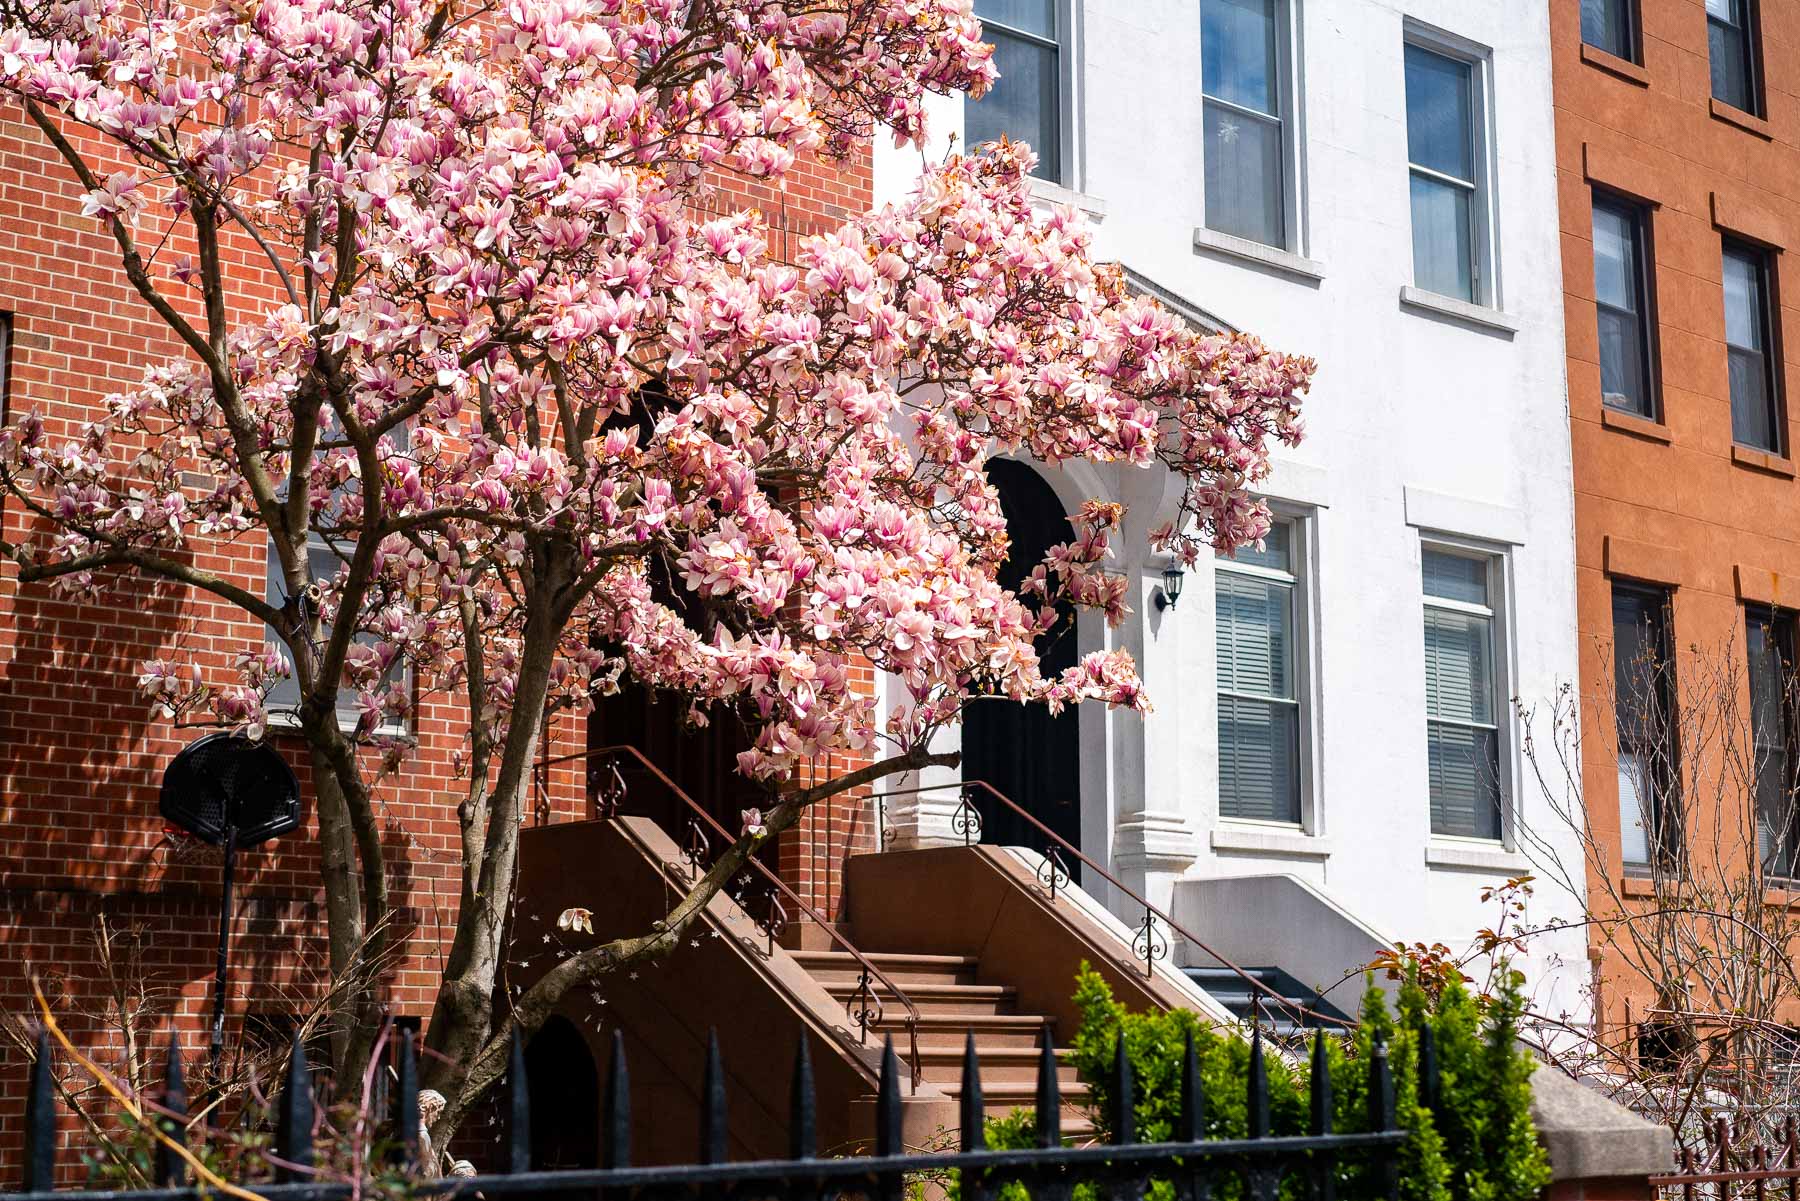 A magnolia tree blooming in front of row houses, one of which is brick and the other is white on a bright sunny day in Carrol Gardens, one of the best neighborhoods to live in Brooklyn